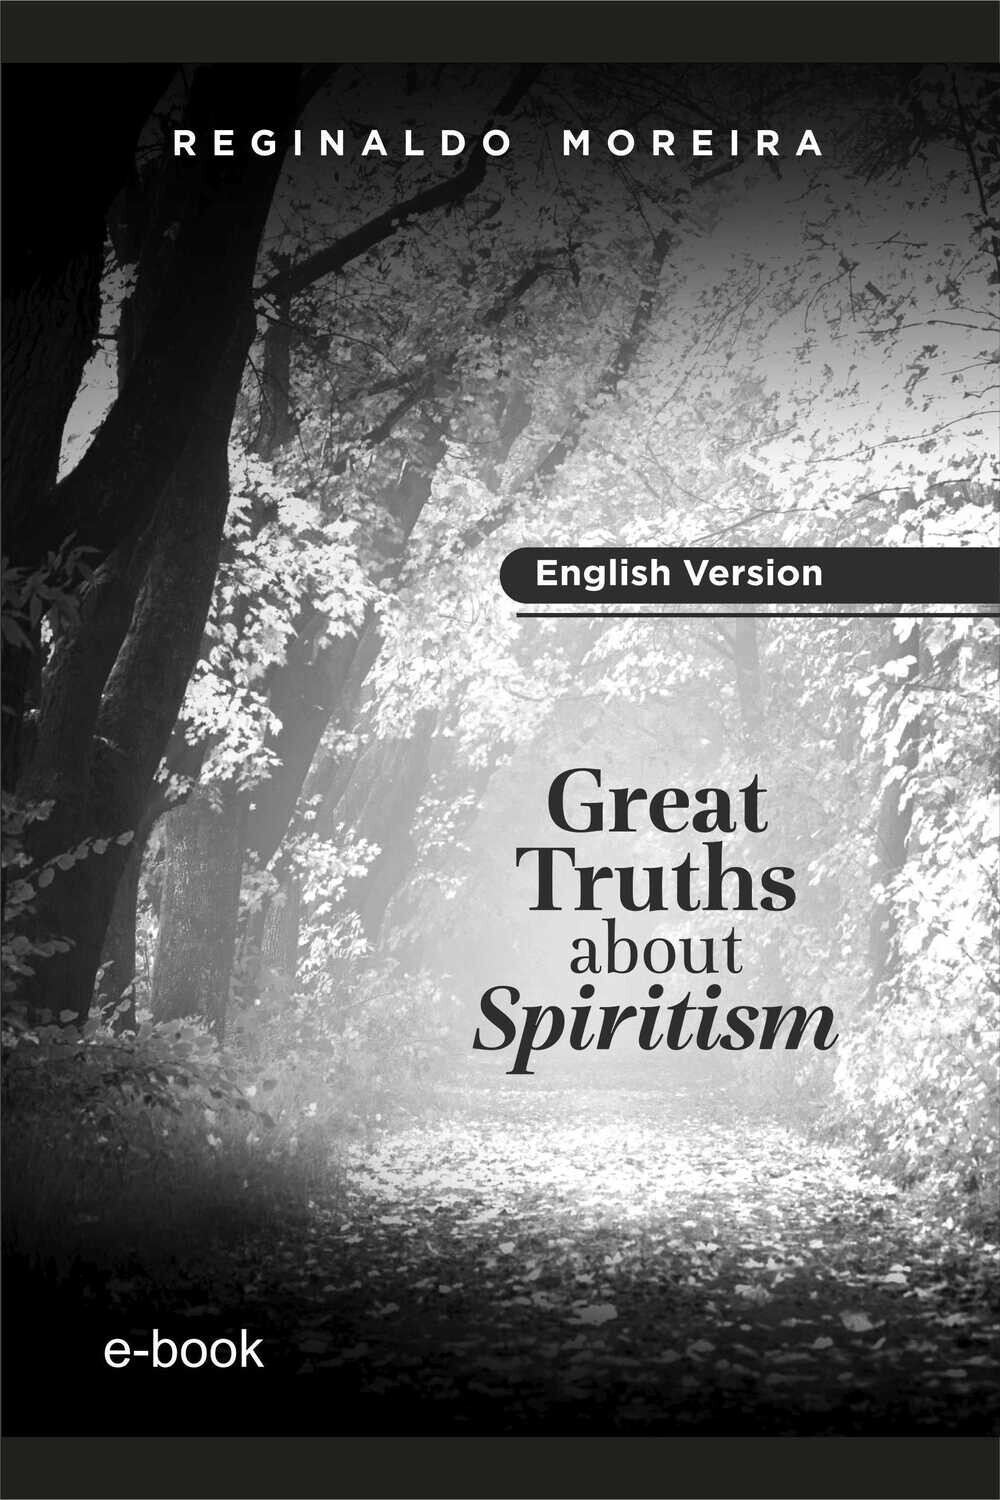 Great truths about spiritism